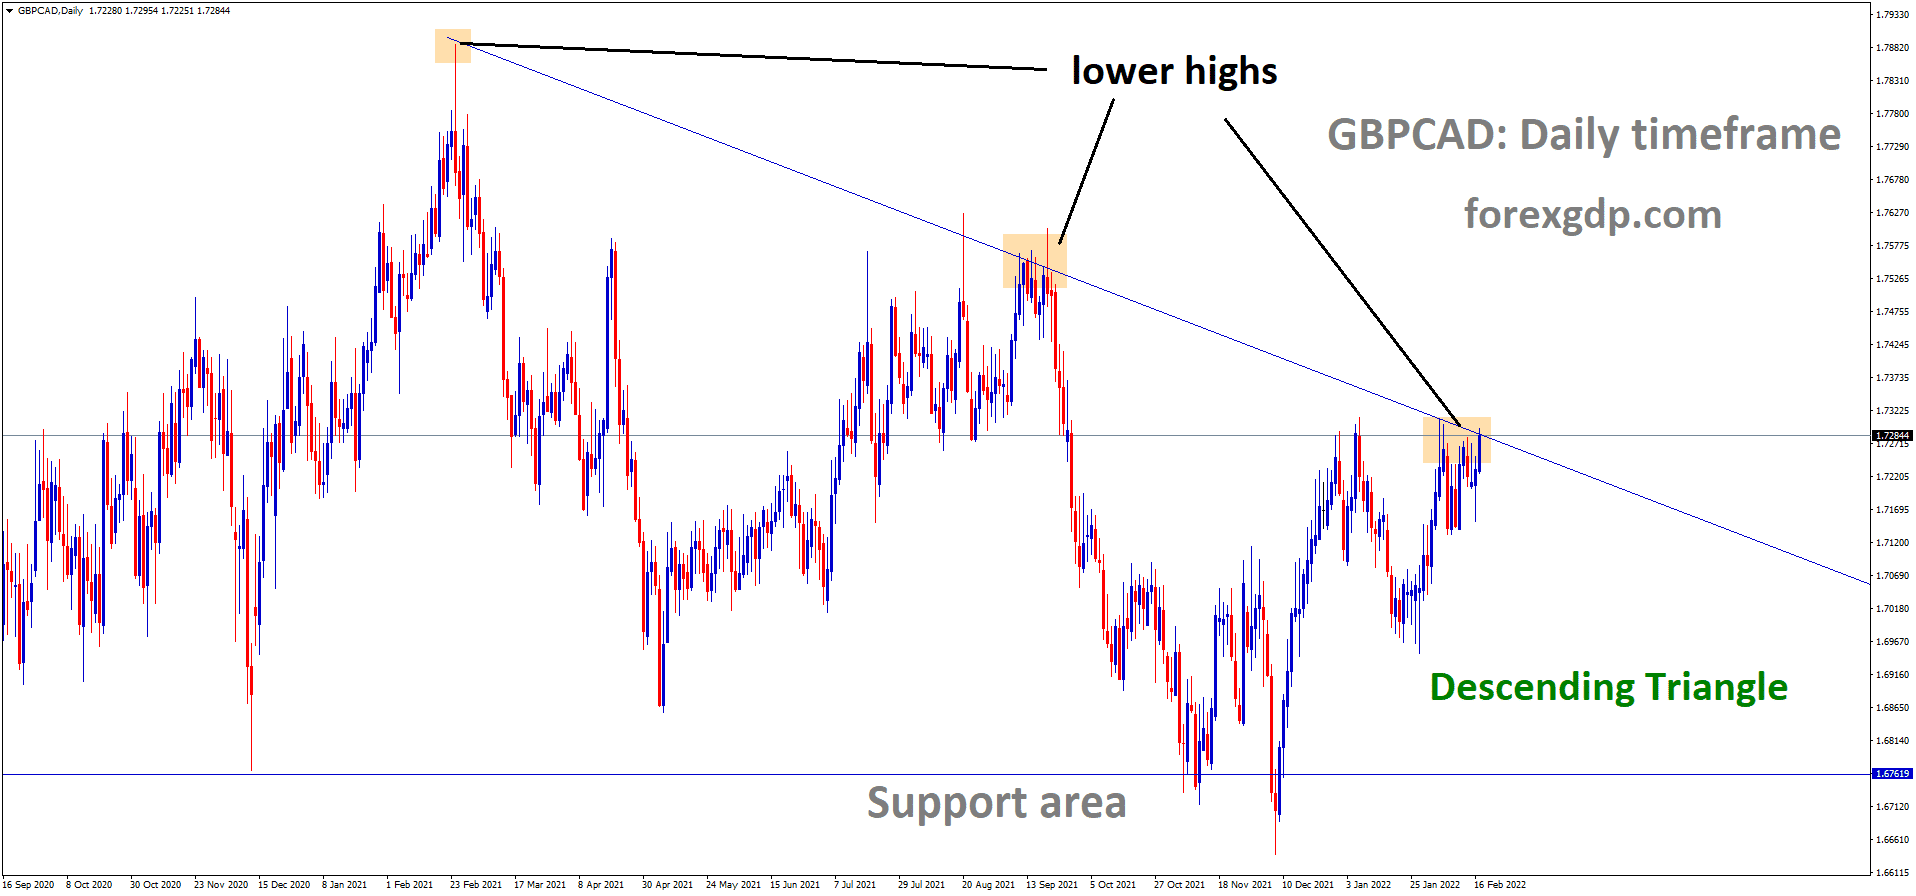 GBPCAD is moving in the Descending triangle pattern and the market has reached the lower high area of the pattern.